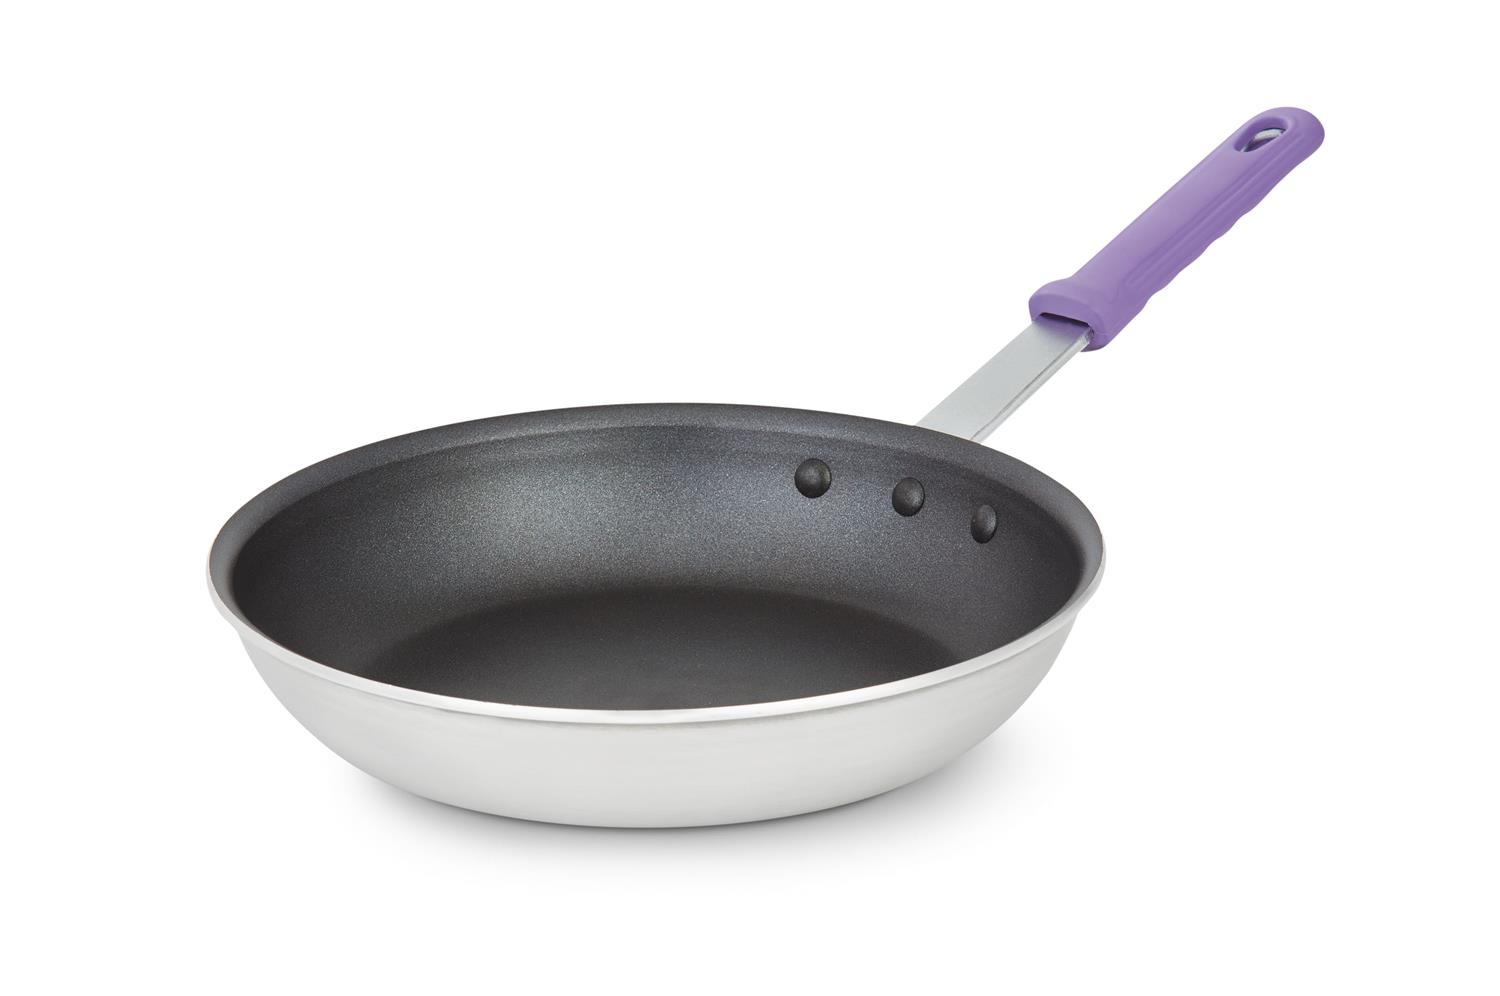 Vollrath T401080 Wear-Ever Fry Pans with SteelCoat x3 Interior and Purple Handle